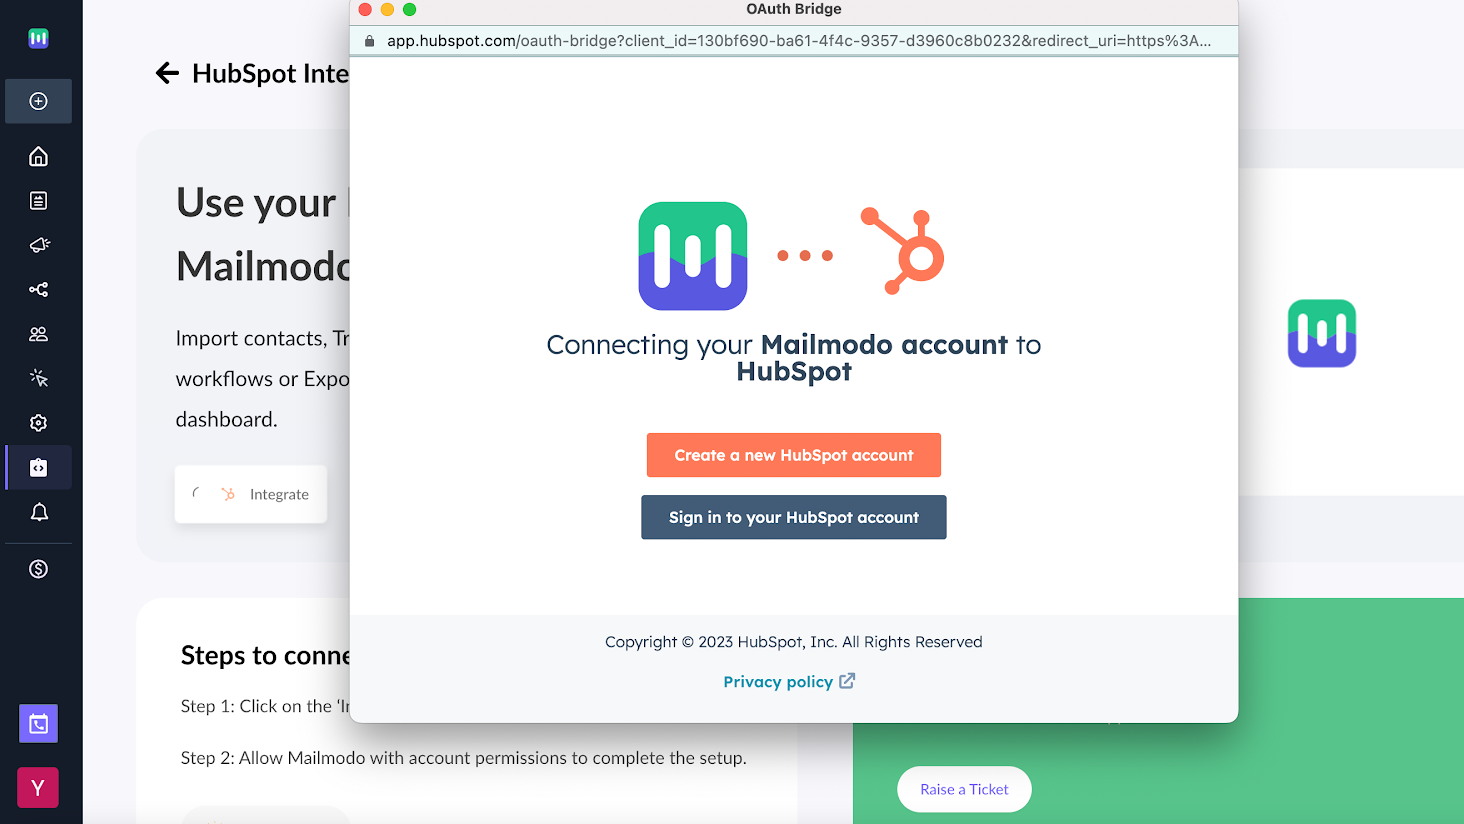 Getting started with HubSpot Integration